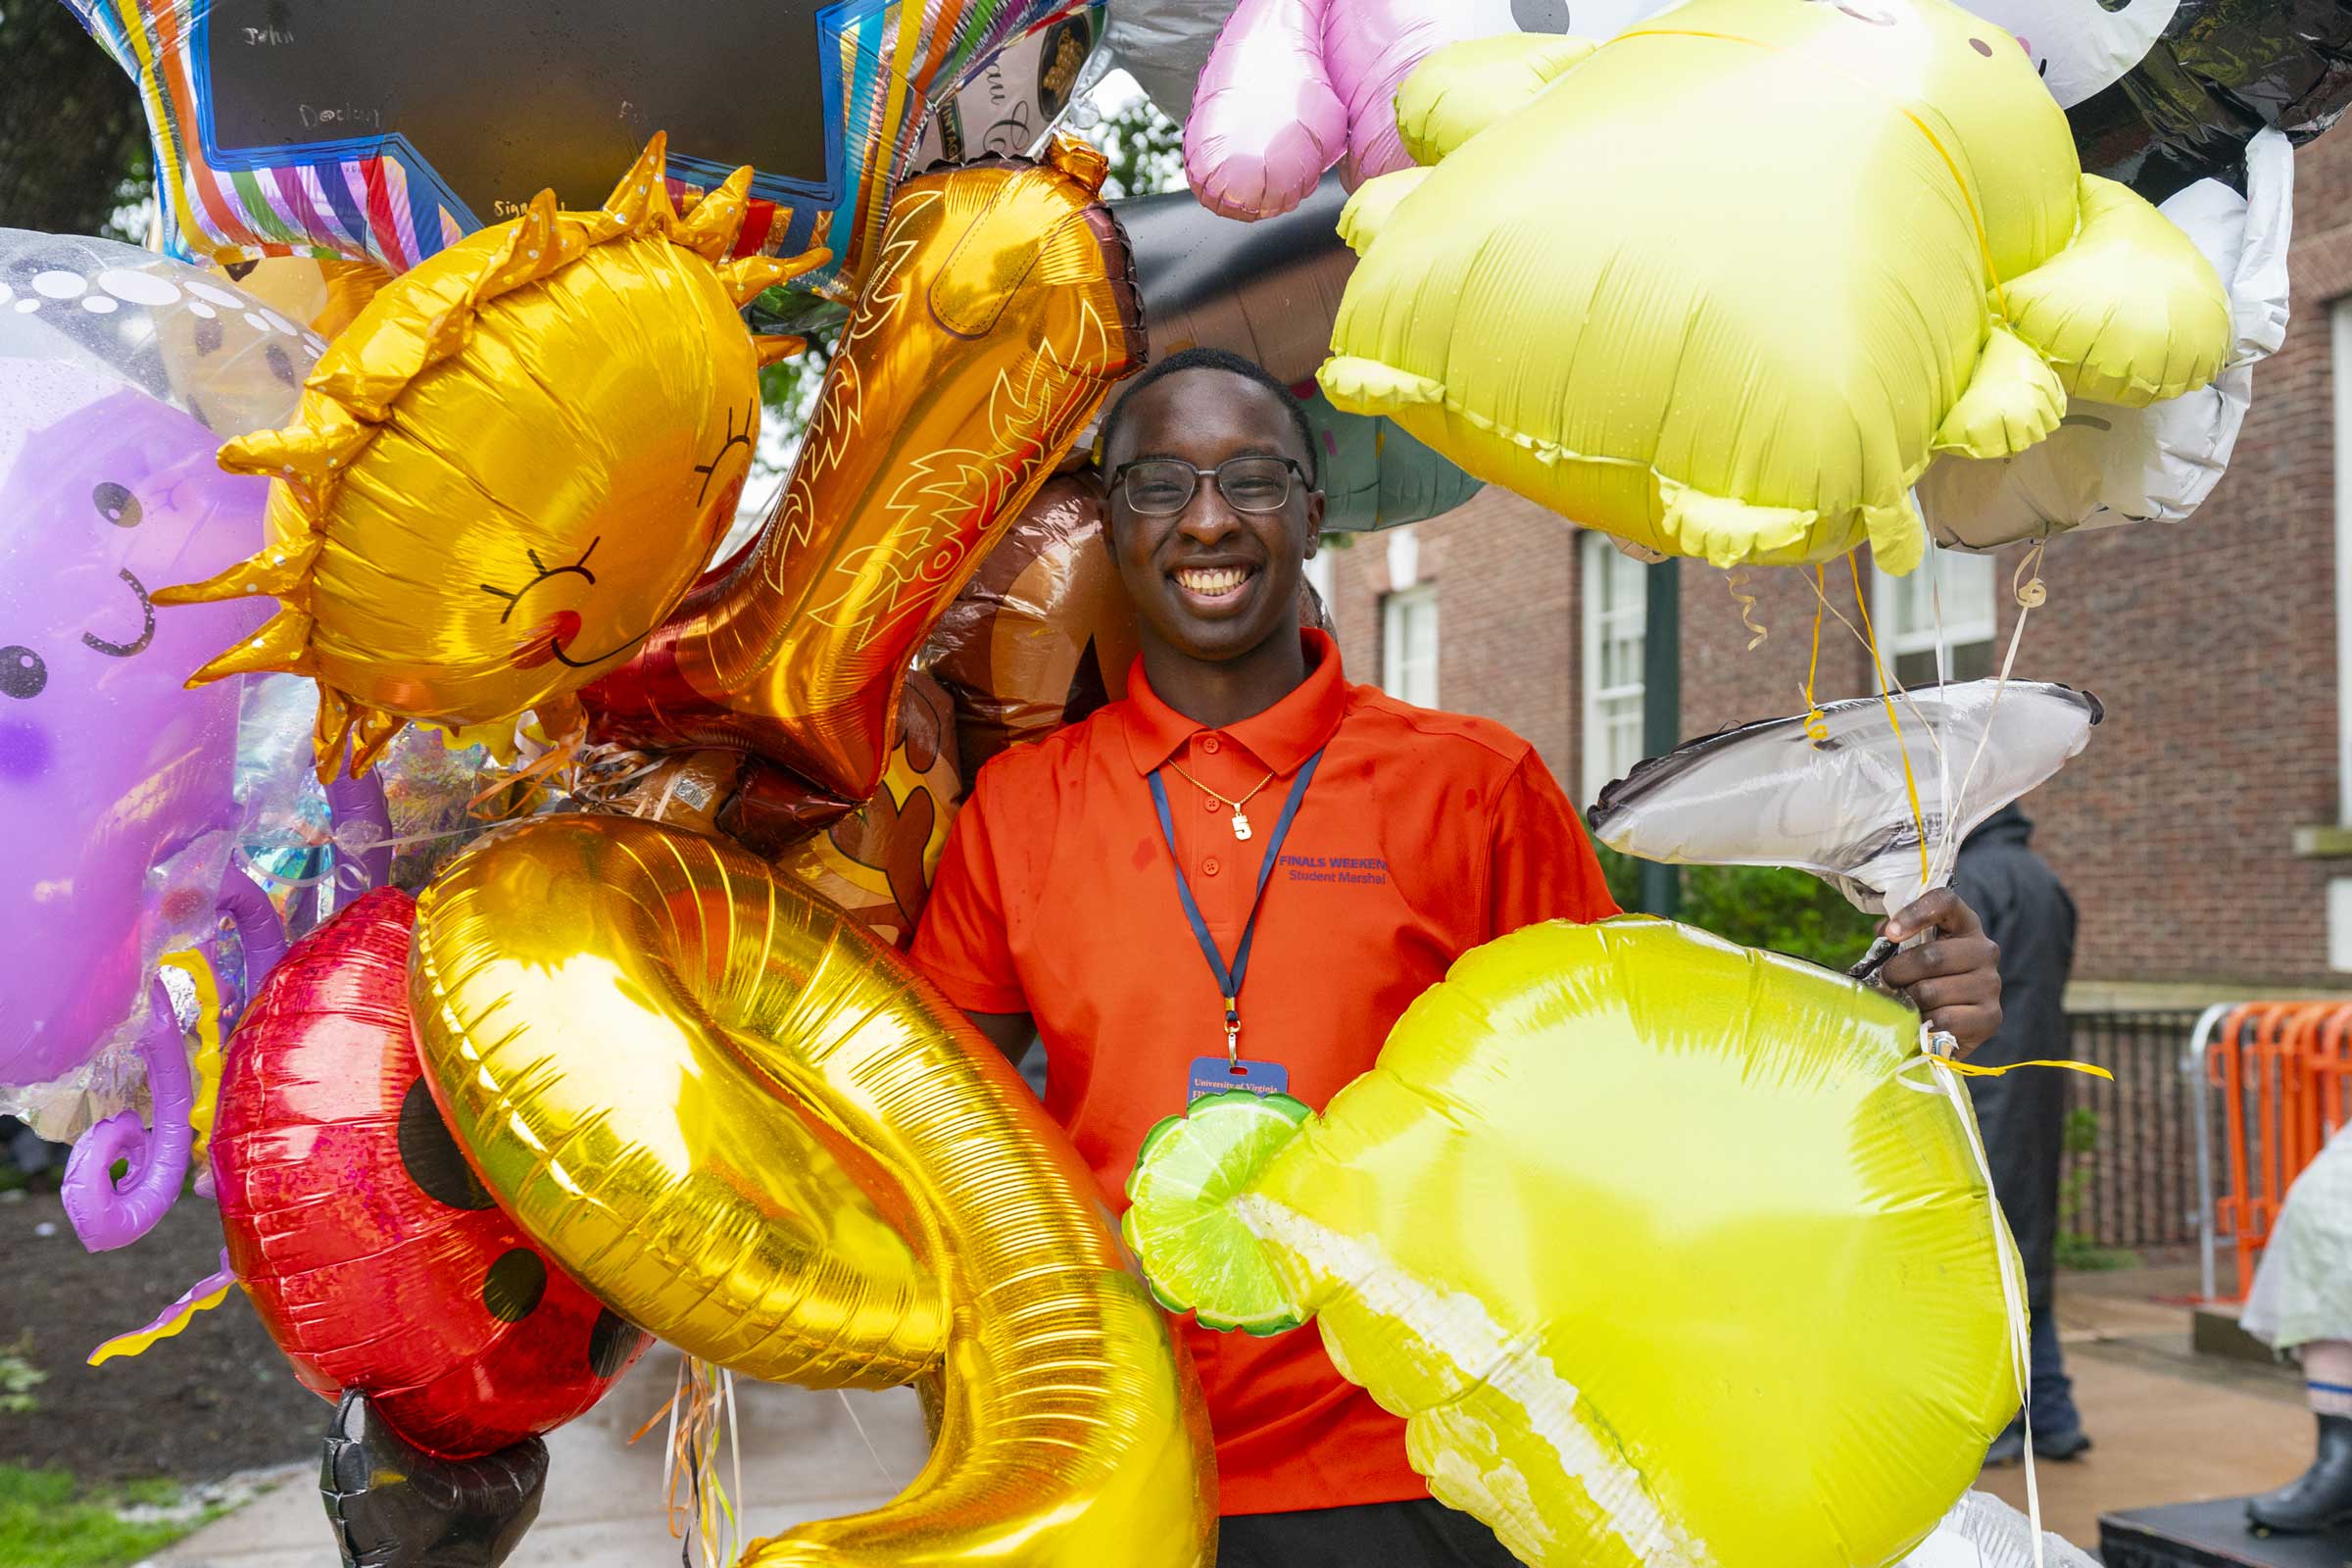 Rising fourth-year student Taryk Saidou was all smiles as he collected balloons. 